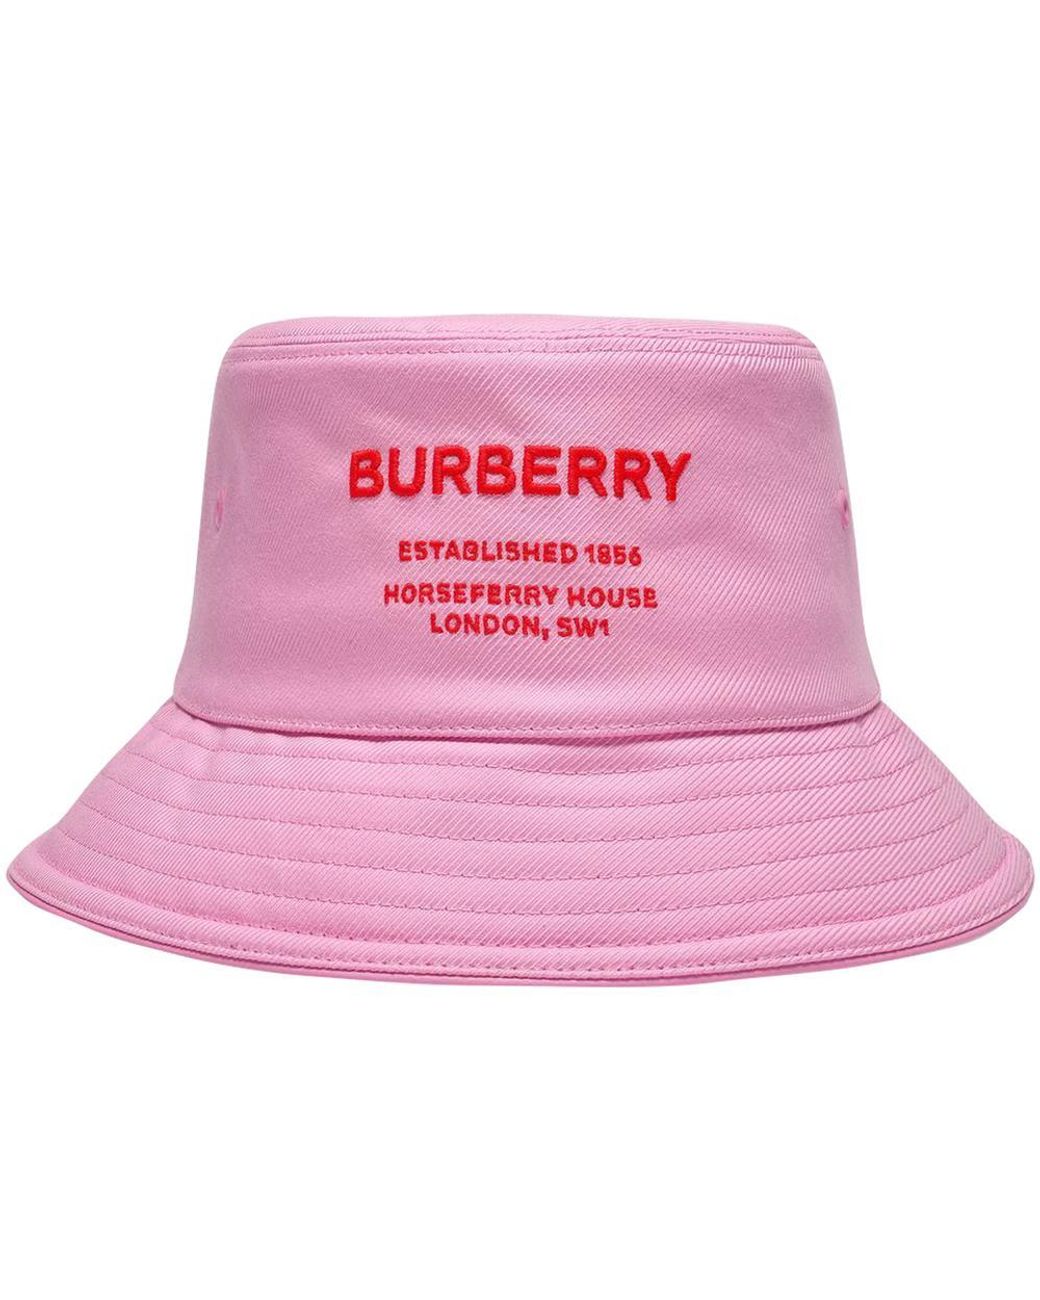 Burberry Horseferry Bucket Hat In Canvas in Pink | Lyst